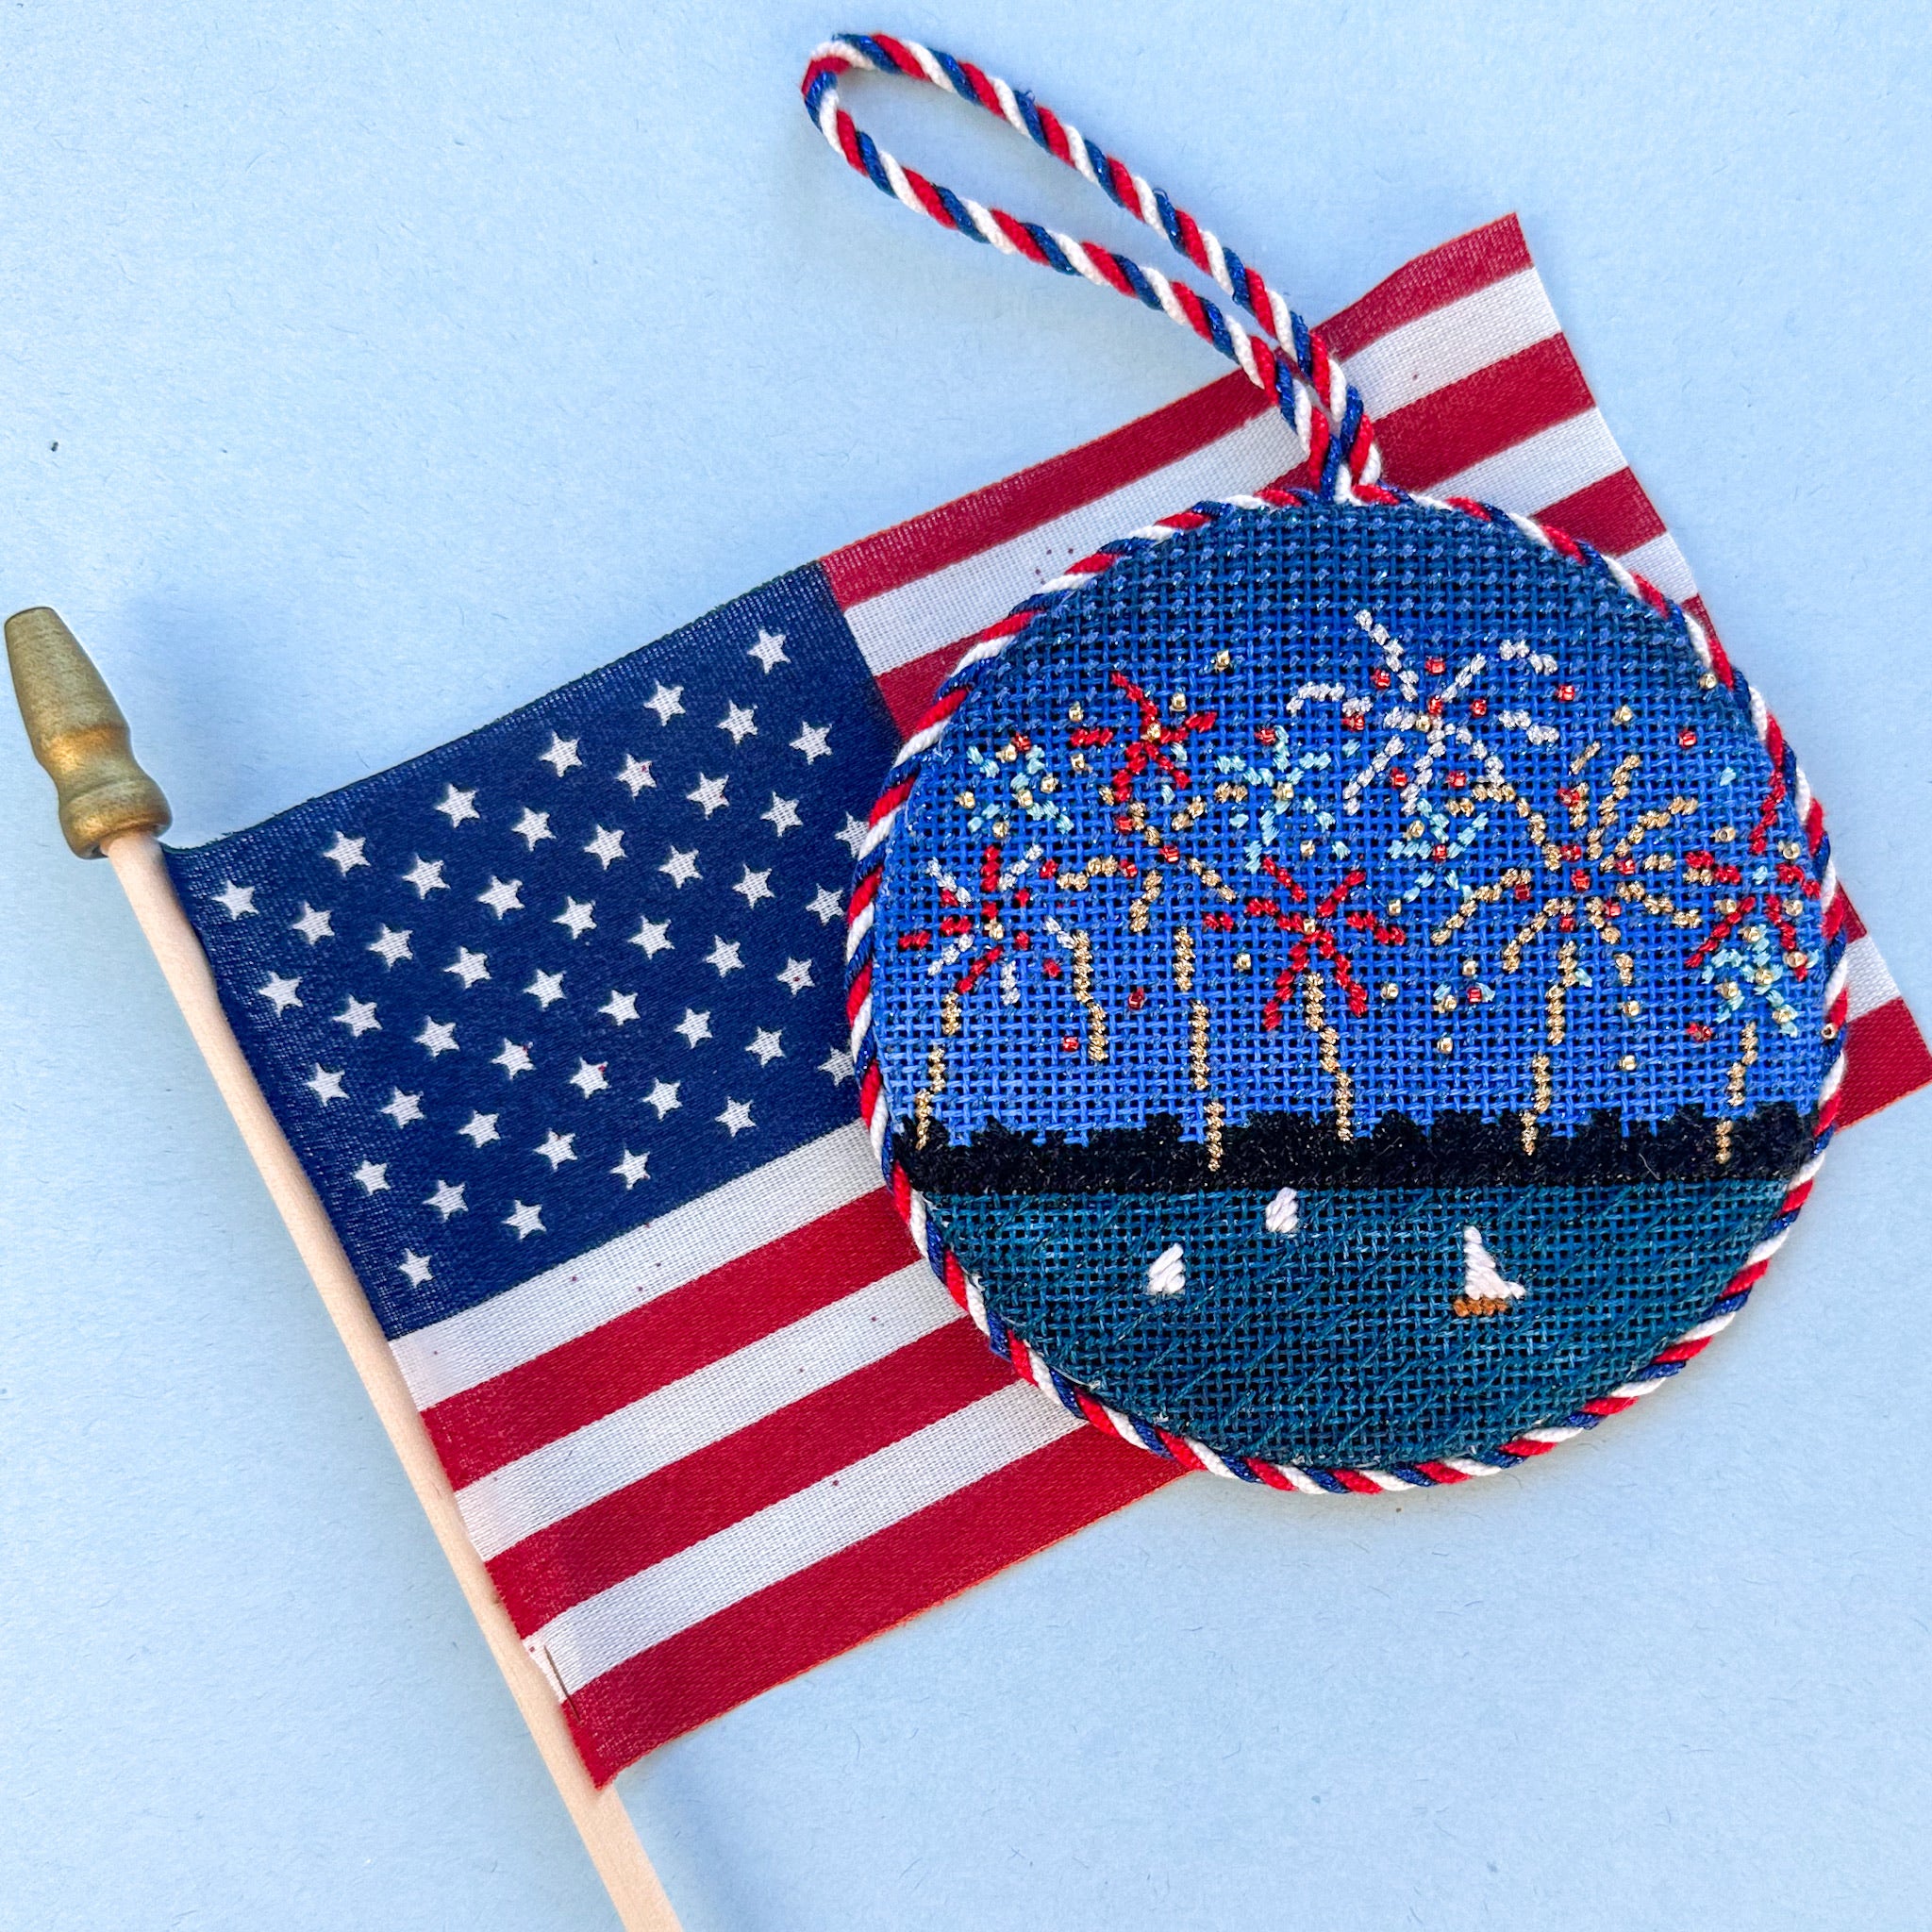 4th Of July Grill With Stitch Guide Needlepoint Canvas from Lycette  Designs. Needlepoint canvases, fibers, and finishing.